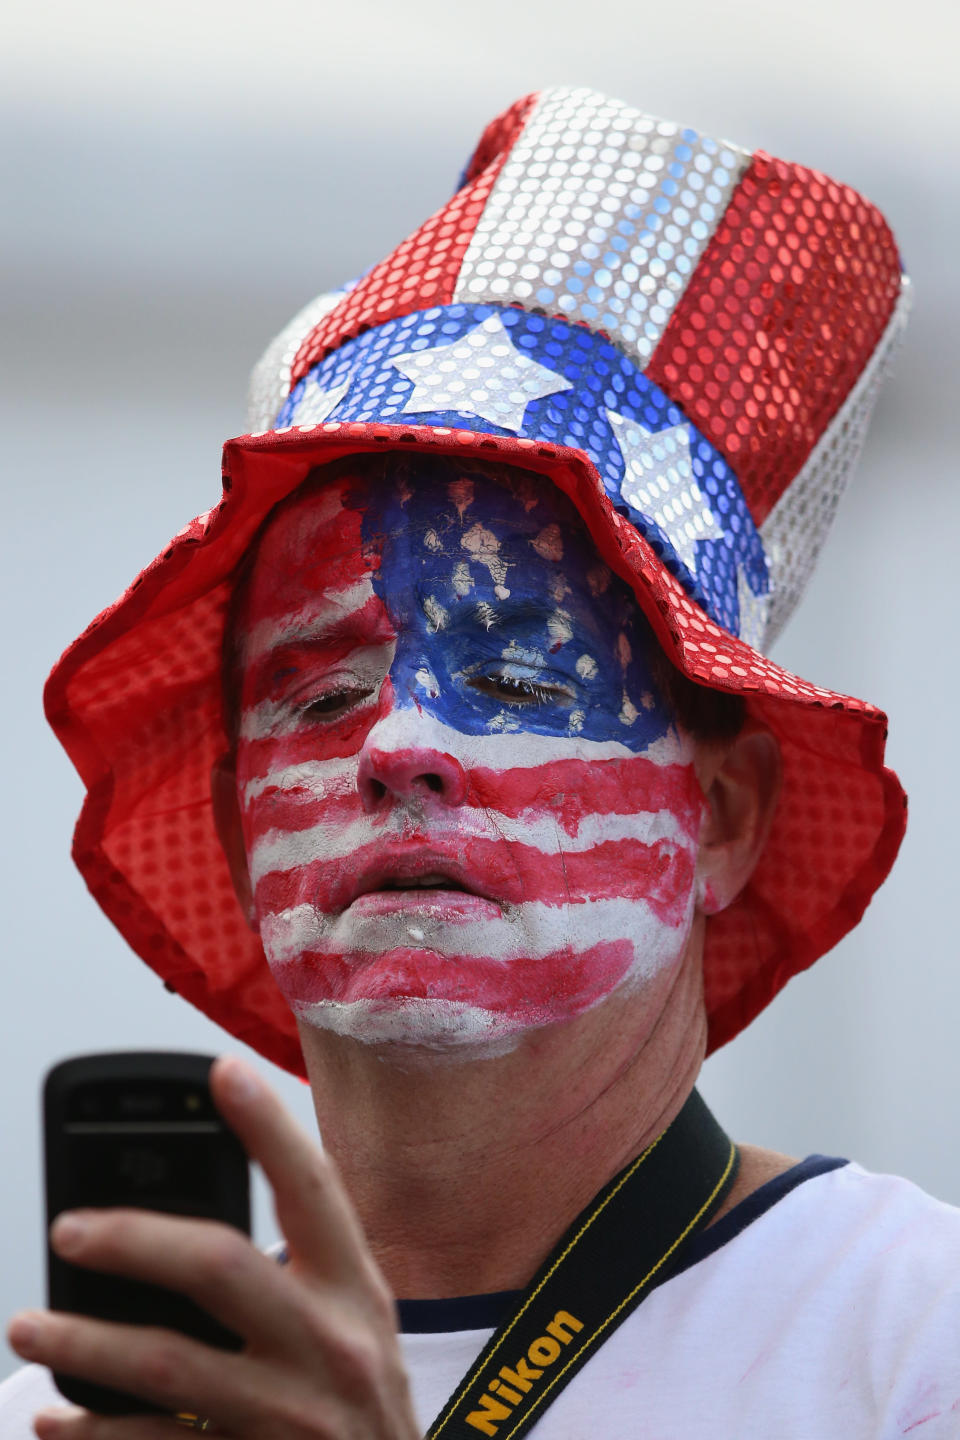 LONDON, ENGLAND - JULY 29: A man with an American flag painted on his face takes a photograph on his phone at the Olympic Park on Day 2 of the London 2012 Olympic Games on July 29, 2012 in London, England. (Photo by Jeff J Mitchell/Getty Images)